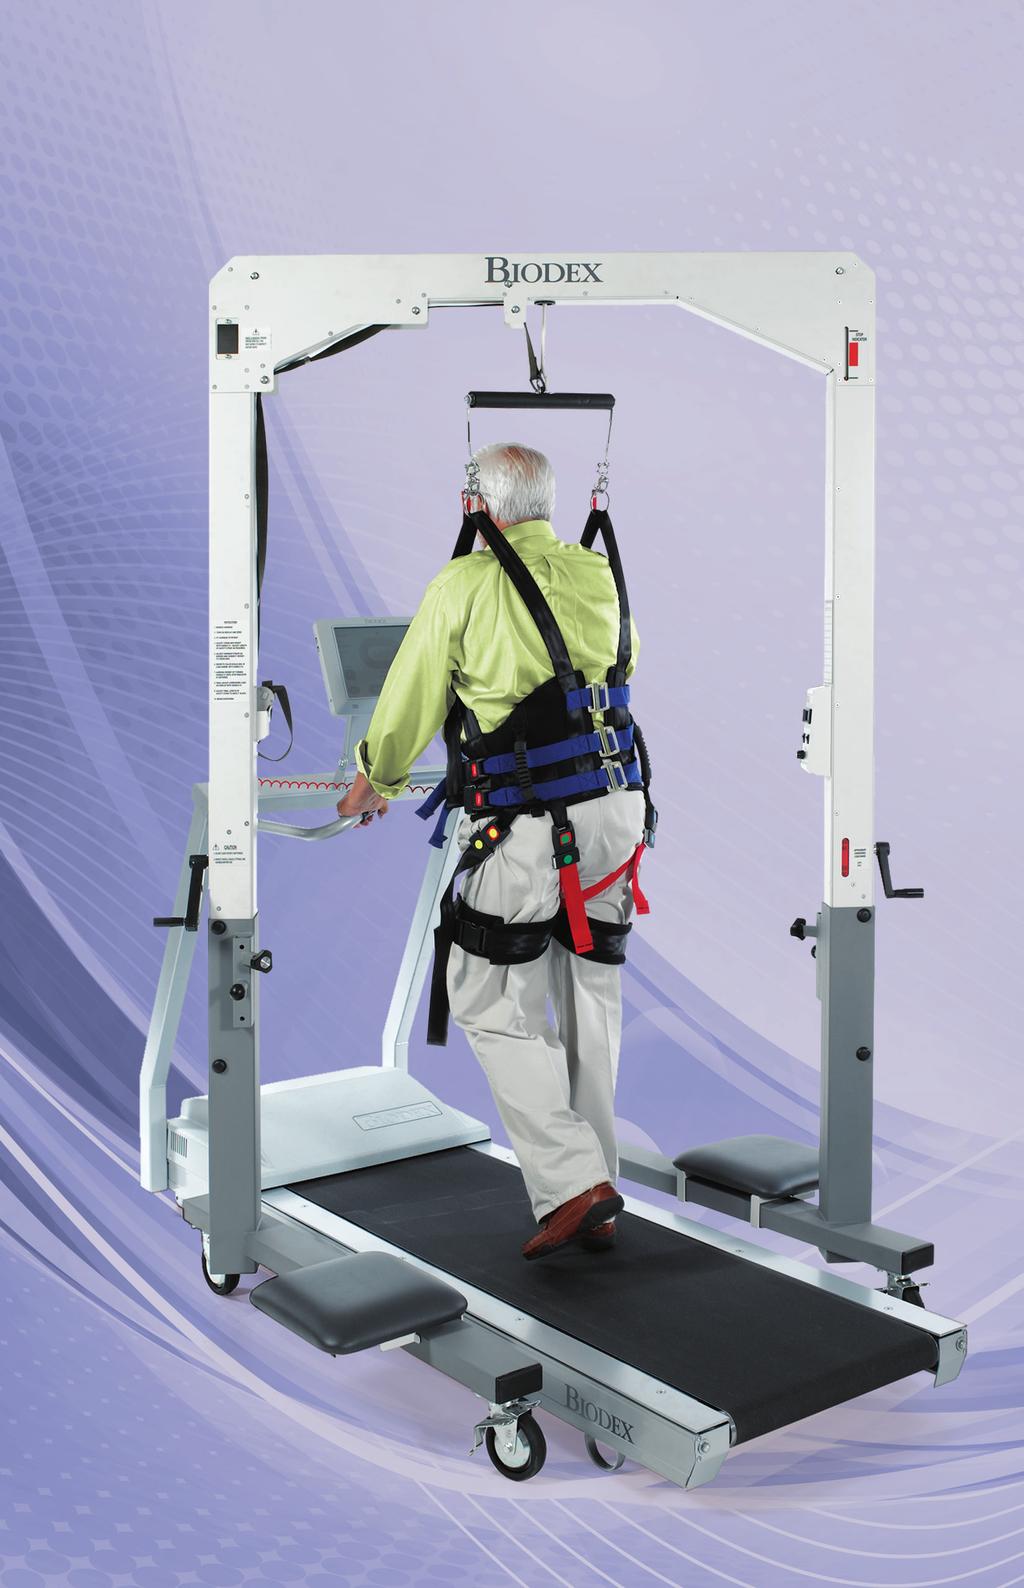 Unweighing System The Biodex Unweighing System enables partial weight-bearing therapy with the assurance of patient comfort and safety, and with convenient access to the patient for manual assistance